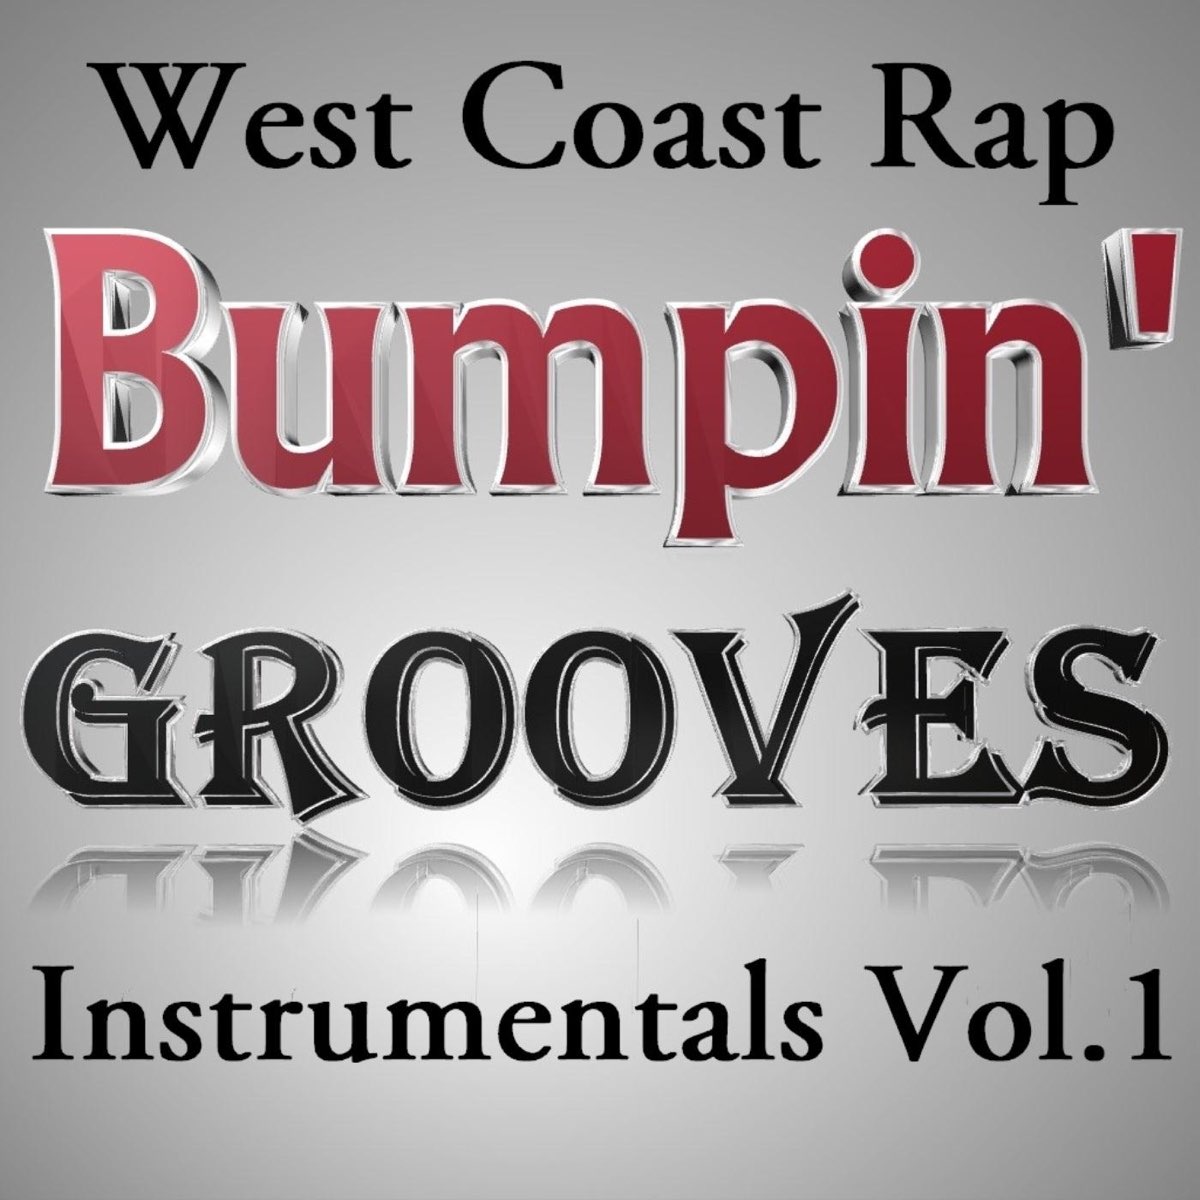 West Coast Rap Instrumentals, Vol. 1 by Bumpin' Grooves on Apple Music